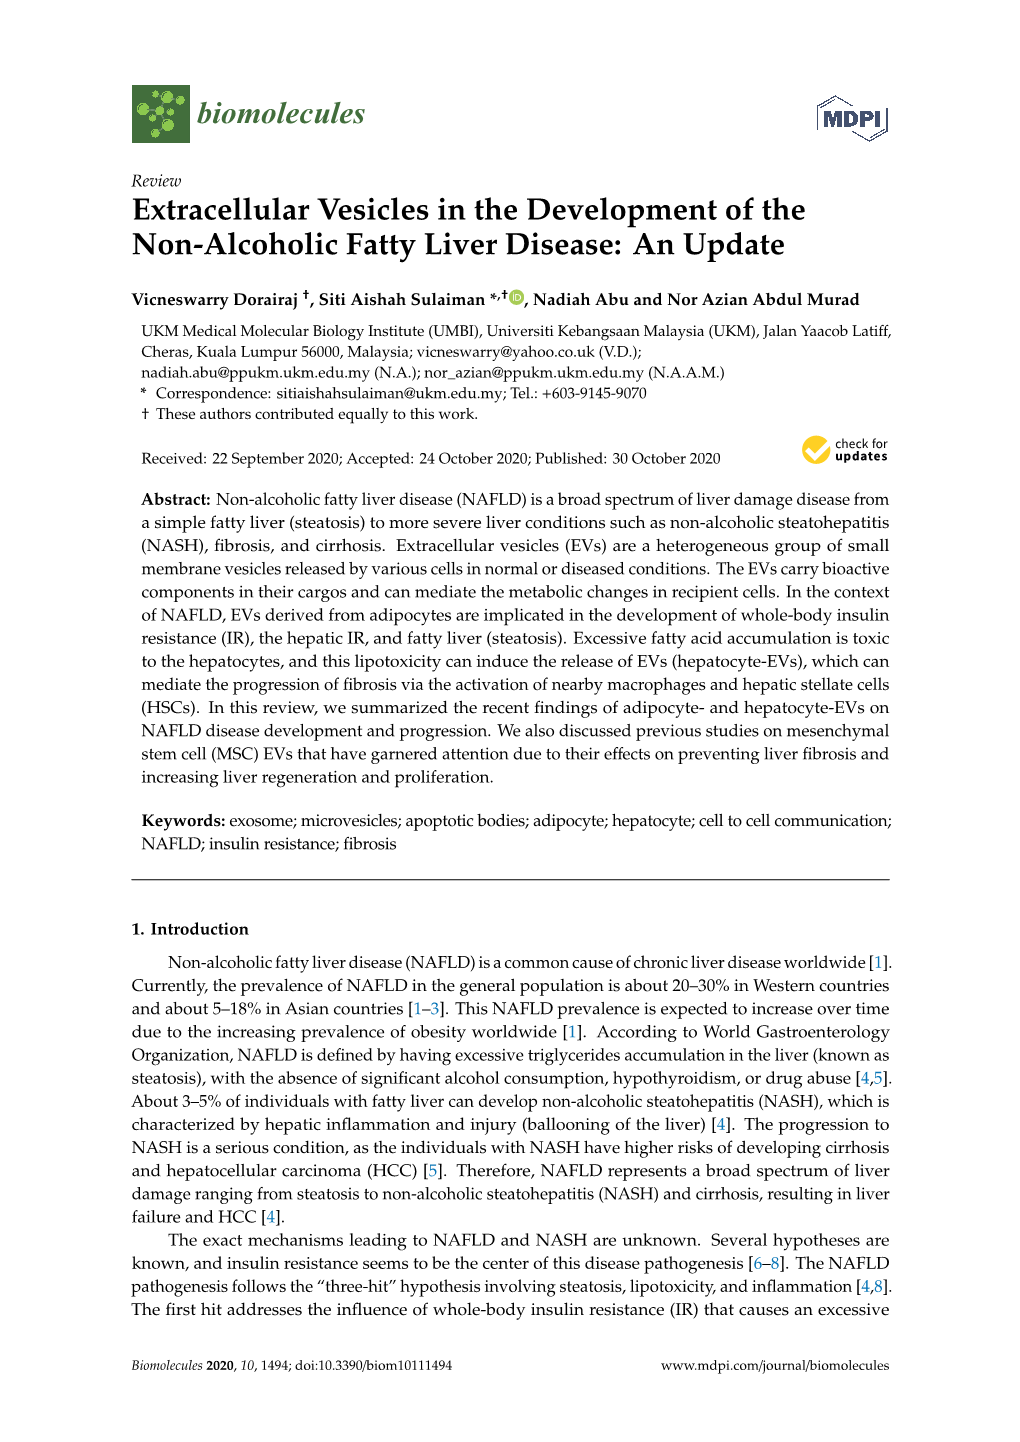 Extracellular Vesicles in the Development of the Non-Alcoholic Fatty Liver Disease: an Update